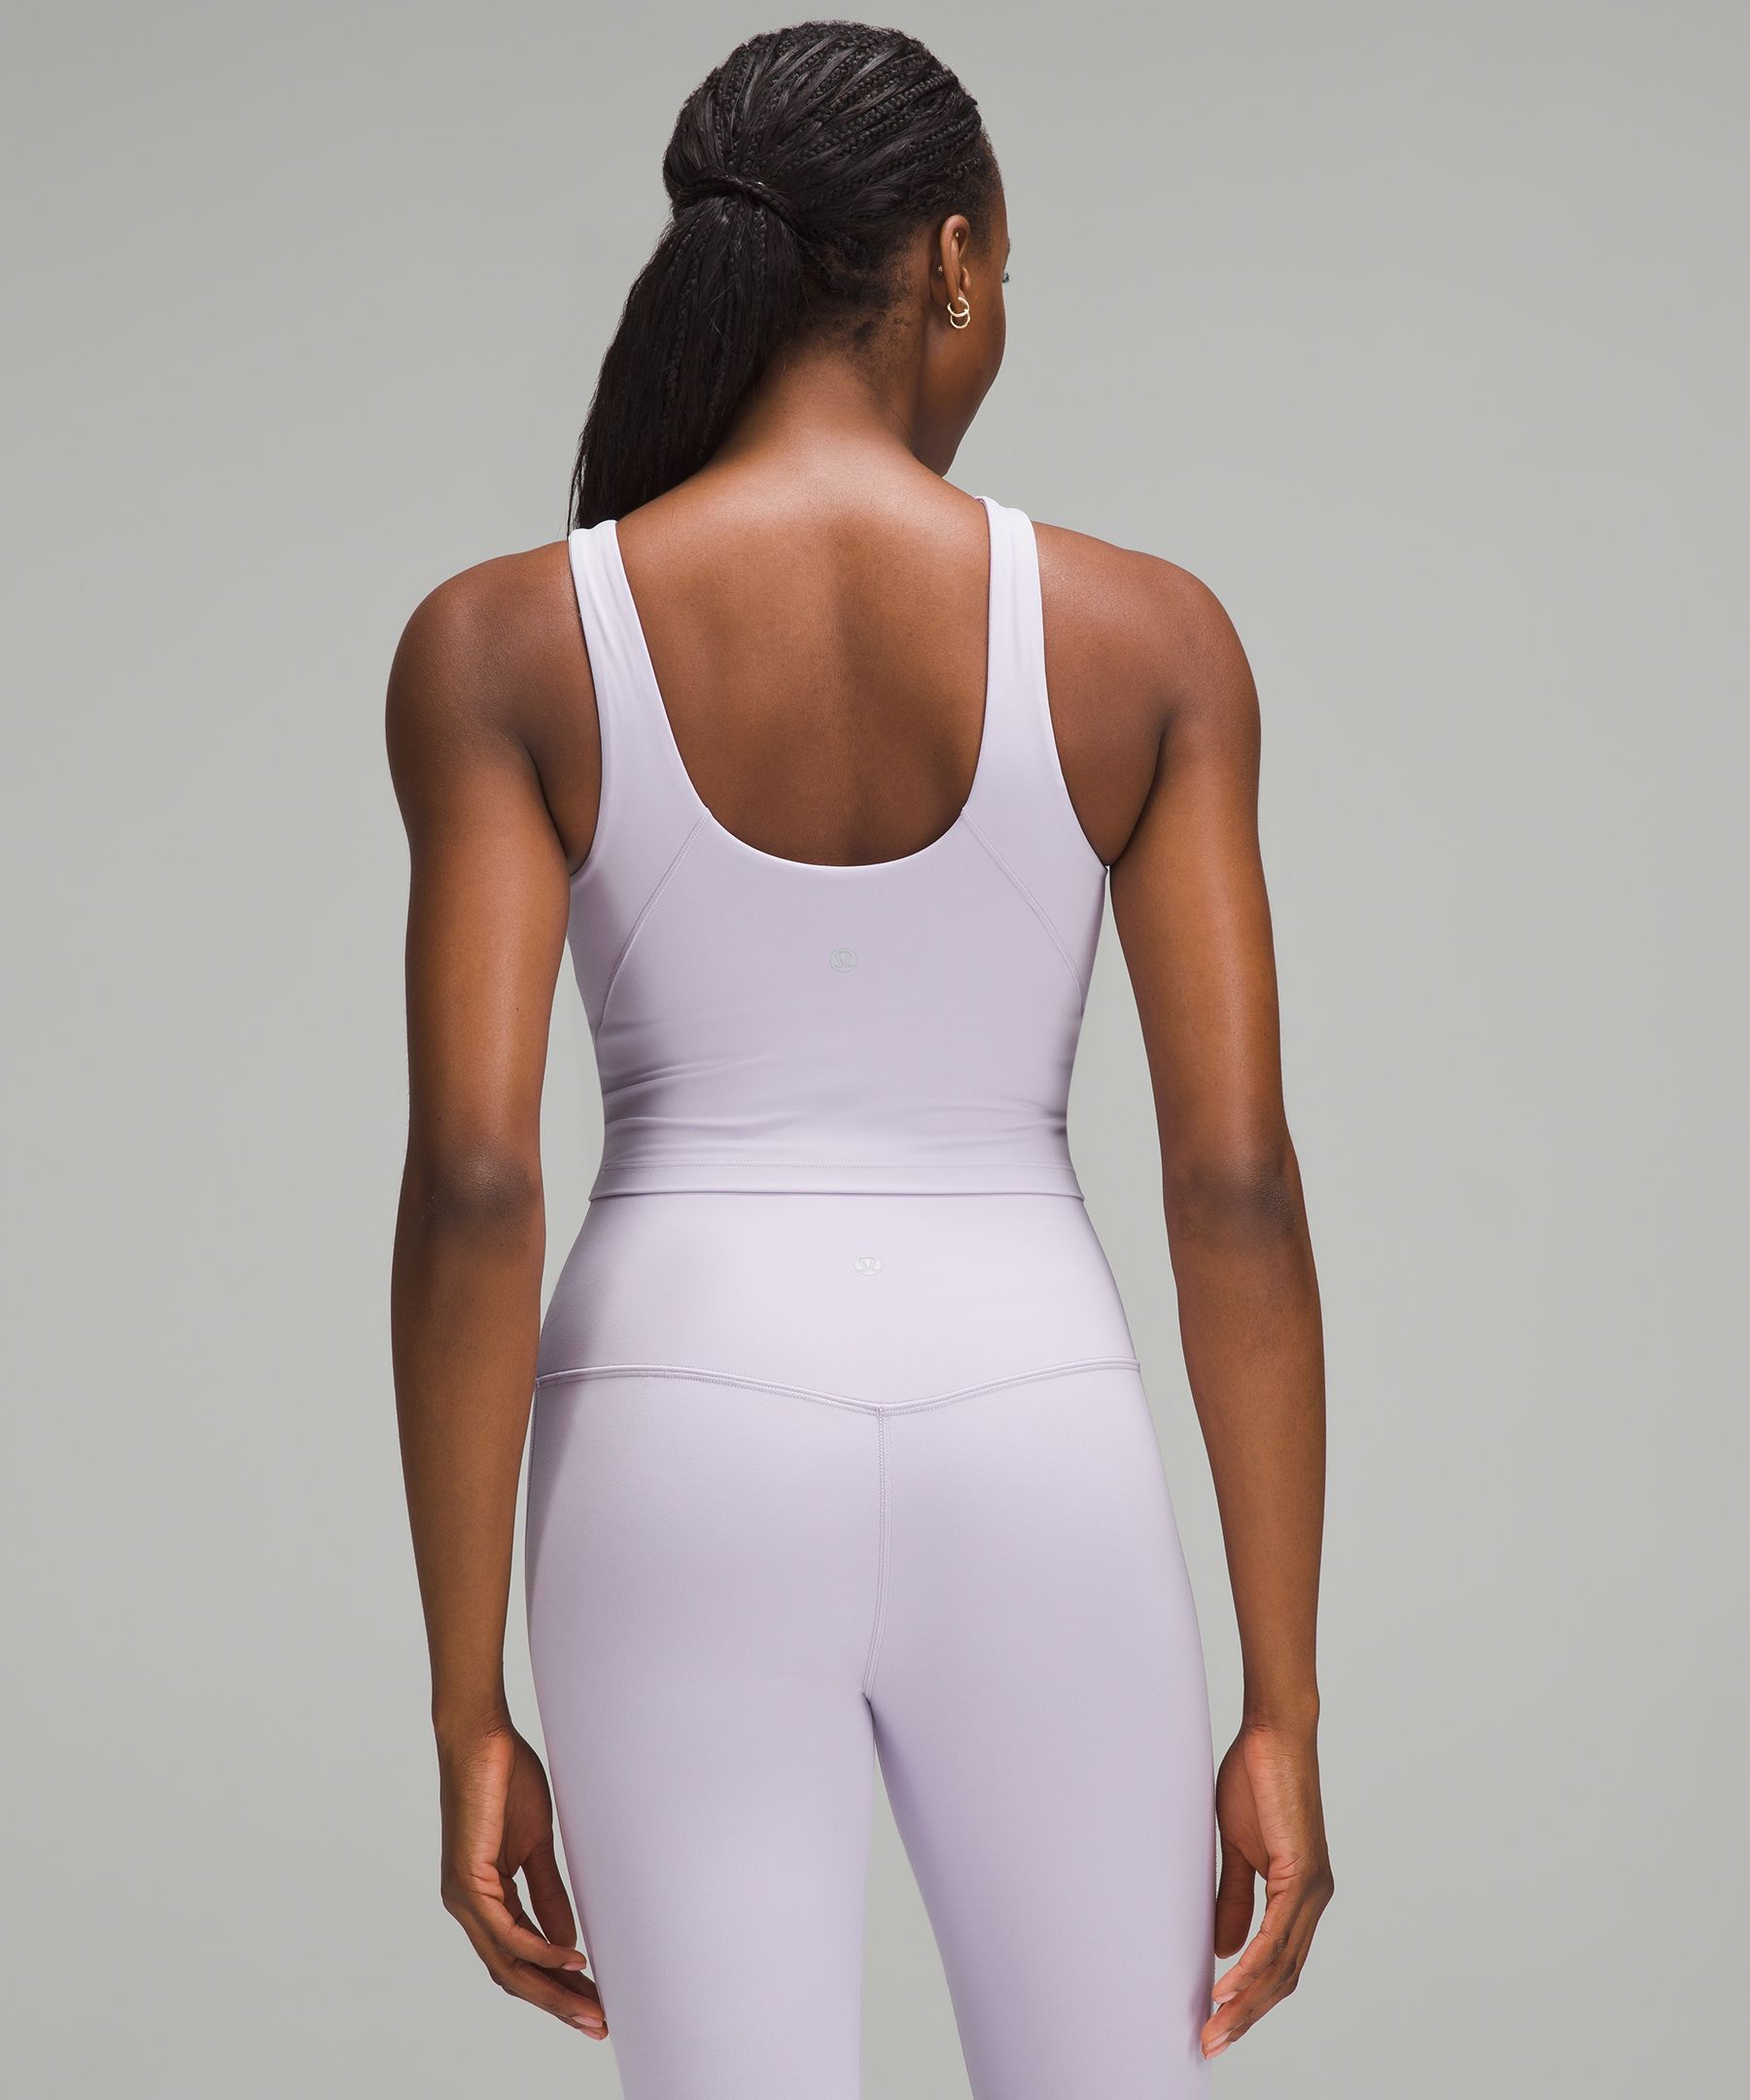 Lululemon Powder Blue Invigorate Tank Size 6 - $40 (41% Off Retail) New  With Tags - From Taylor